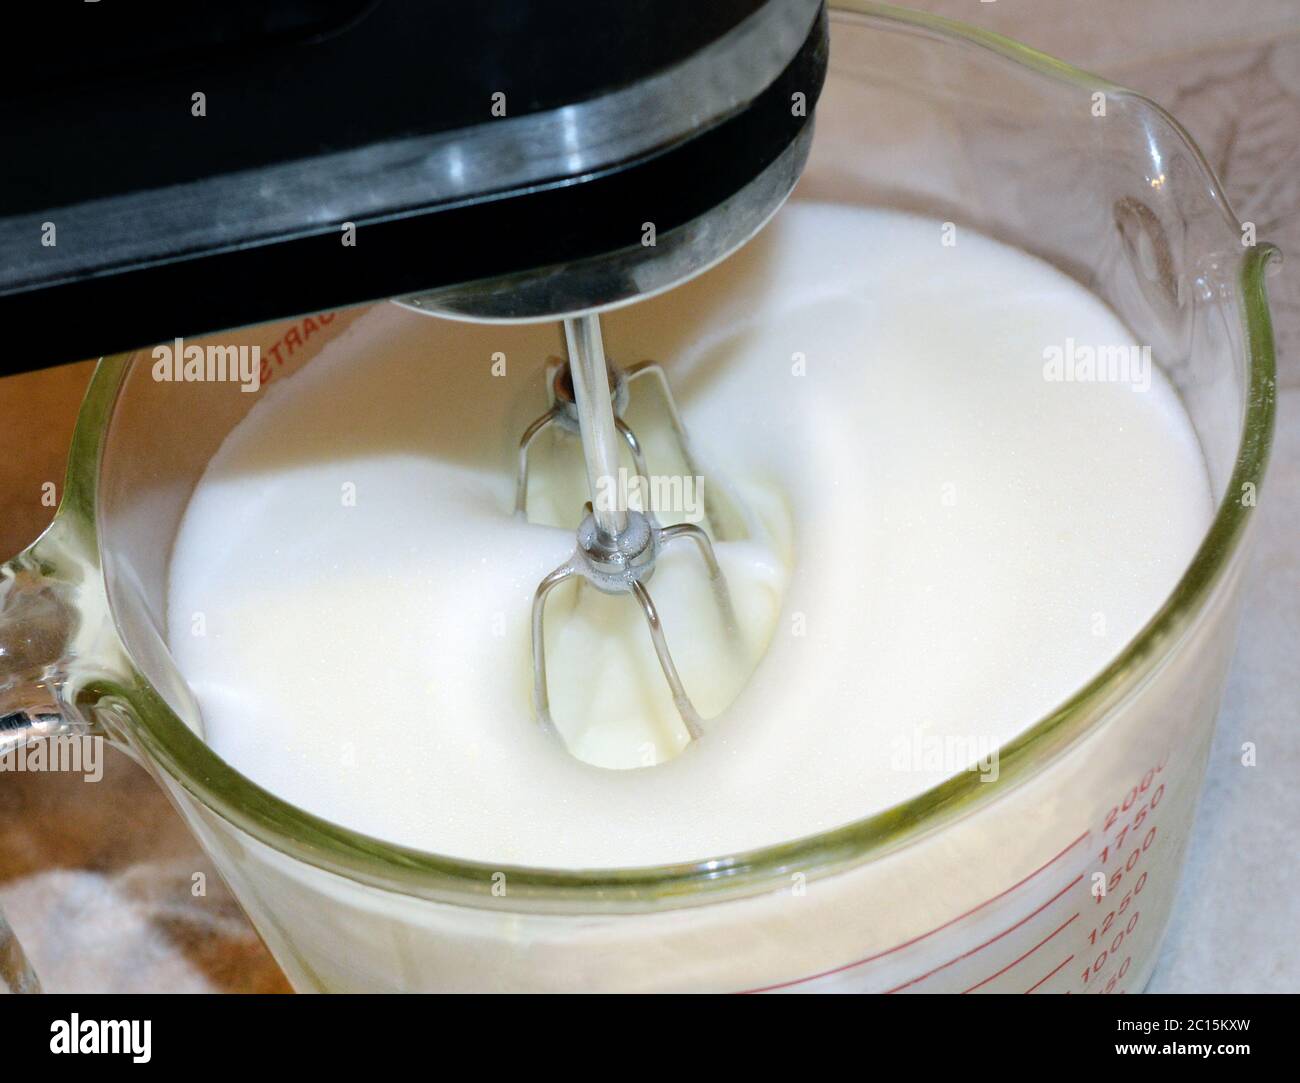 Close up photo of a mixer whipping ingredients in a glass bowl. Stock Photo